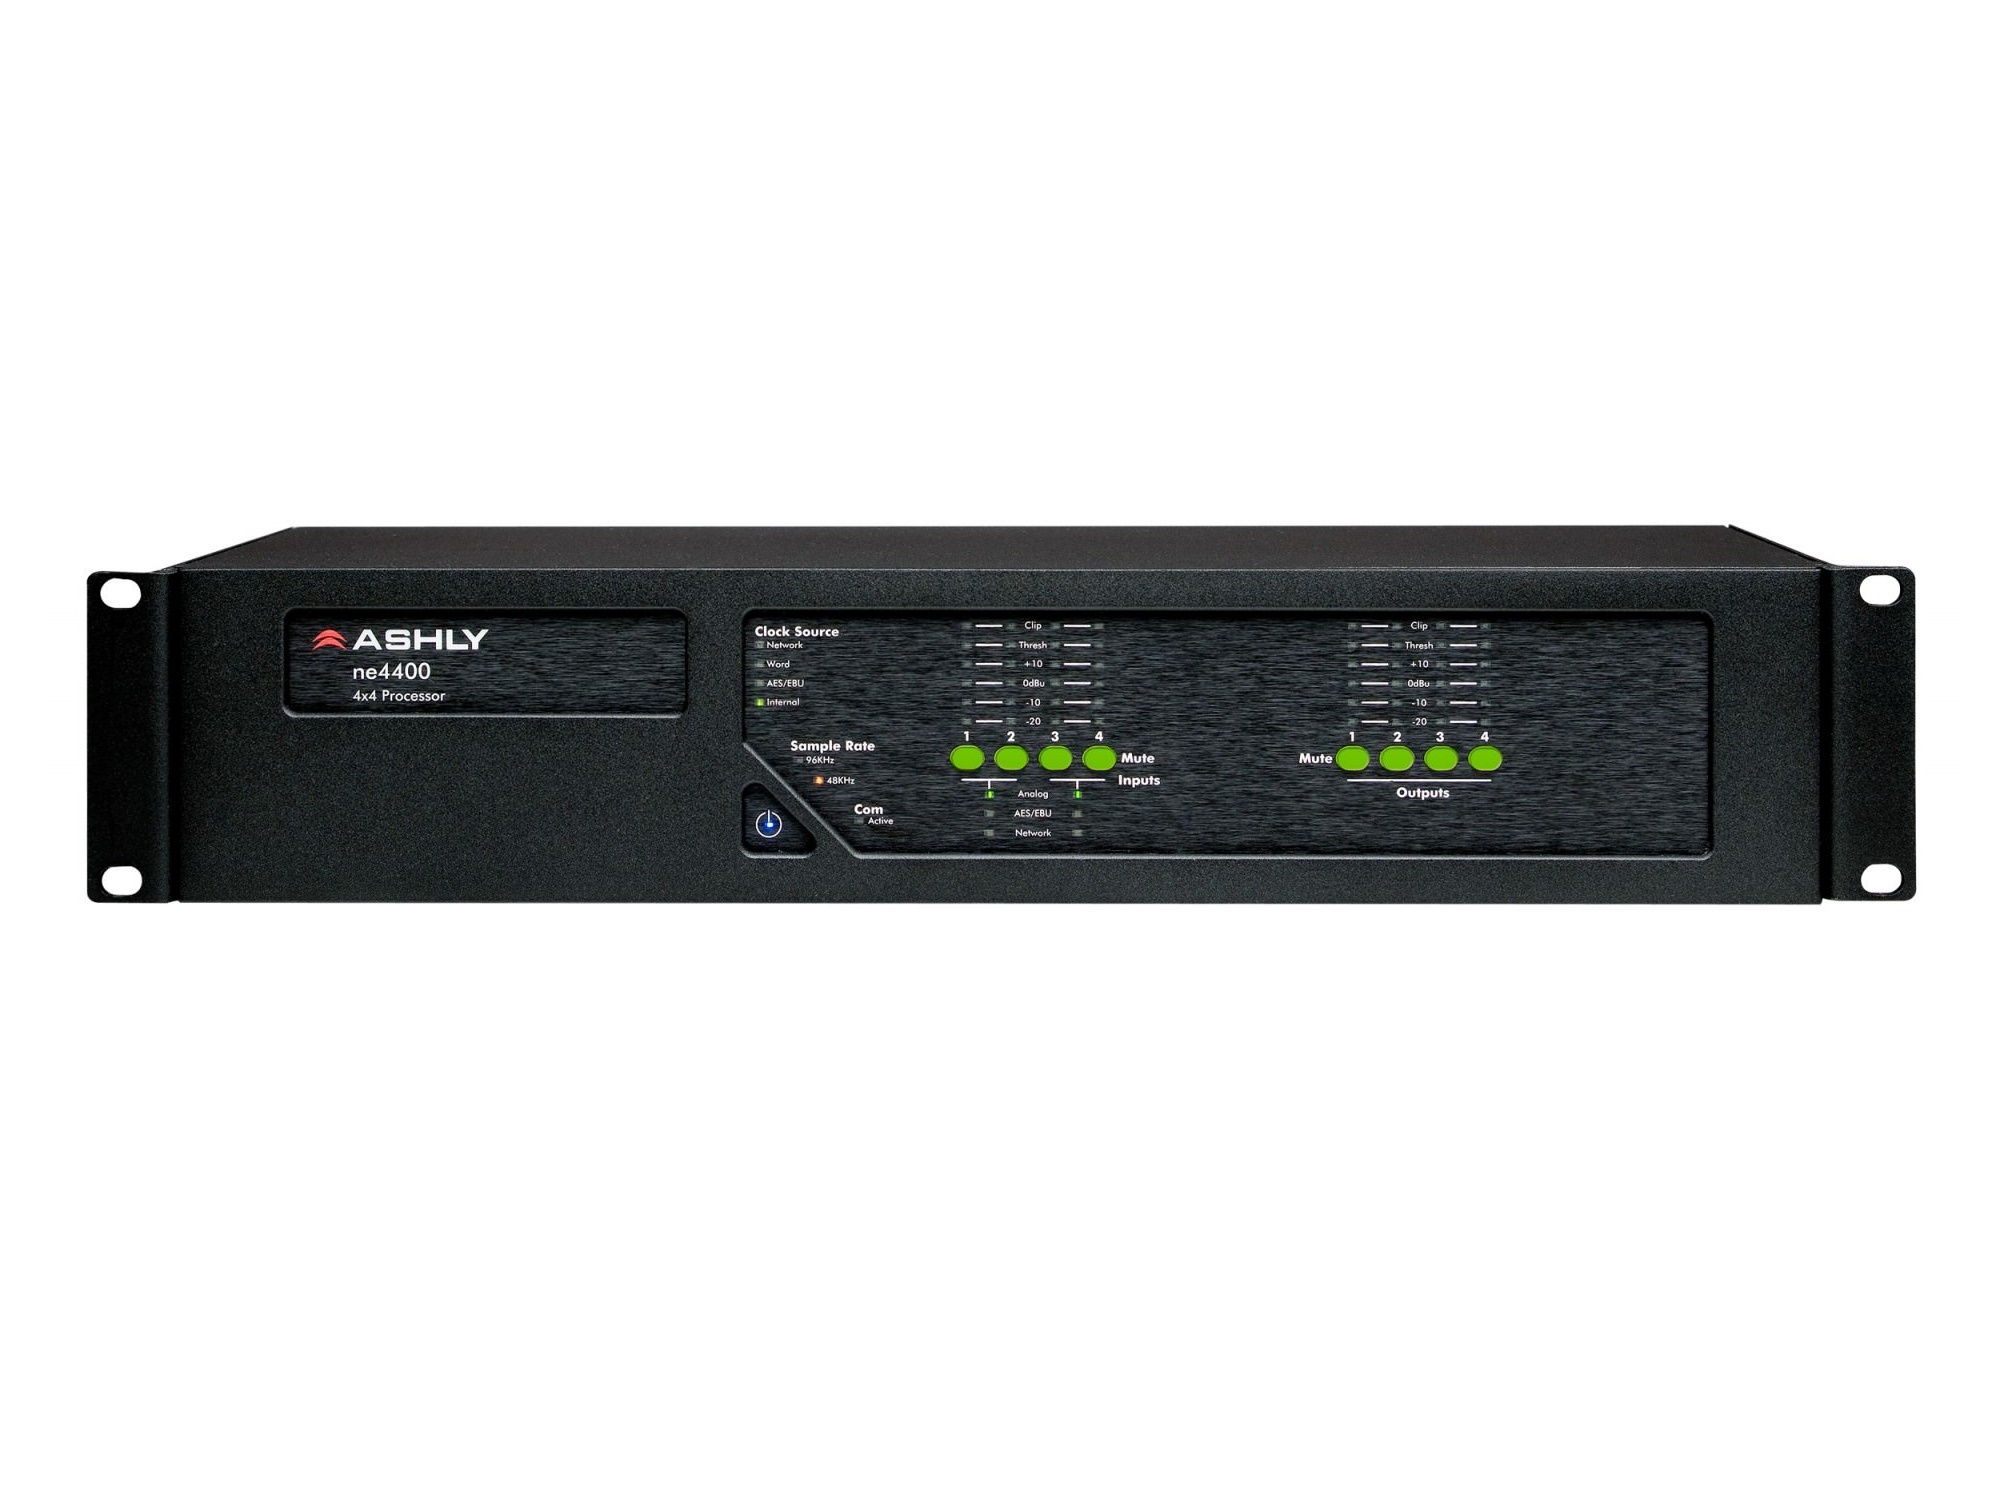 ne4400sd ne4400 Network Protea System Processor plus 4-Chan AES3 Outputs and Dante Network Card by Ashly